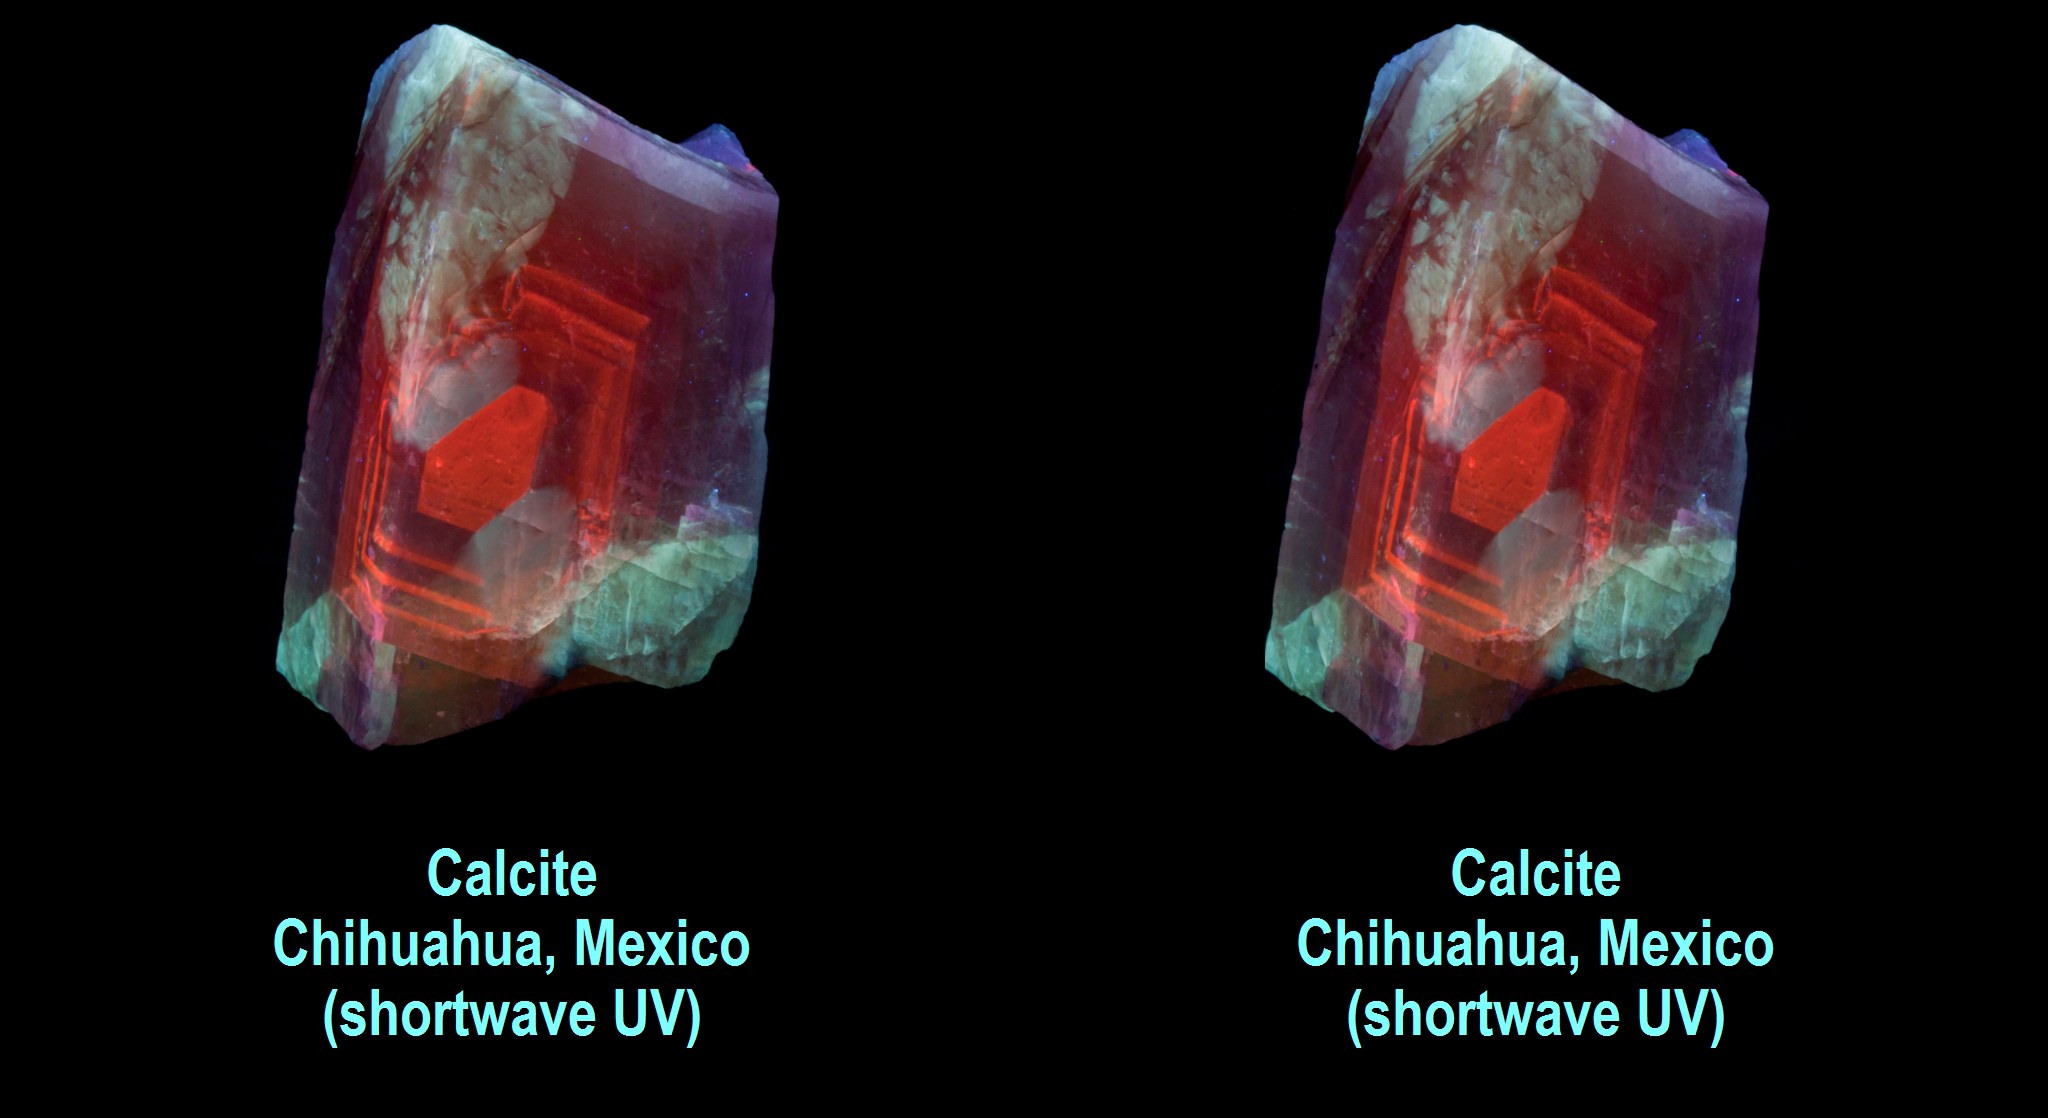 Calcite - Chihuahua, Mexico (shortwave UV) - Pattern is only visible under shortwave ultraviolet light